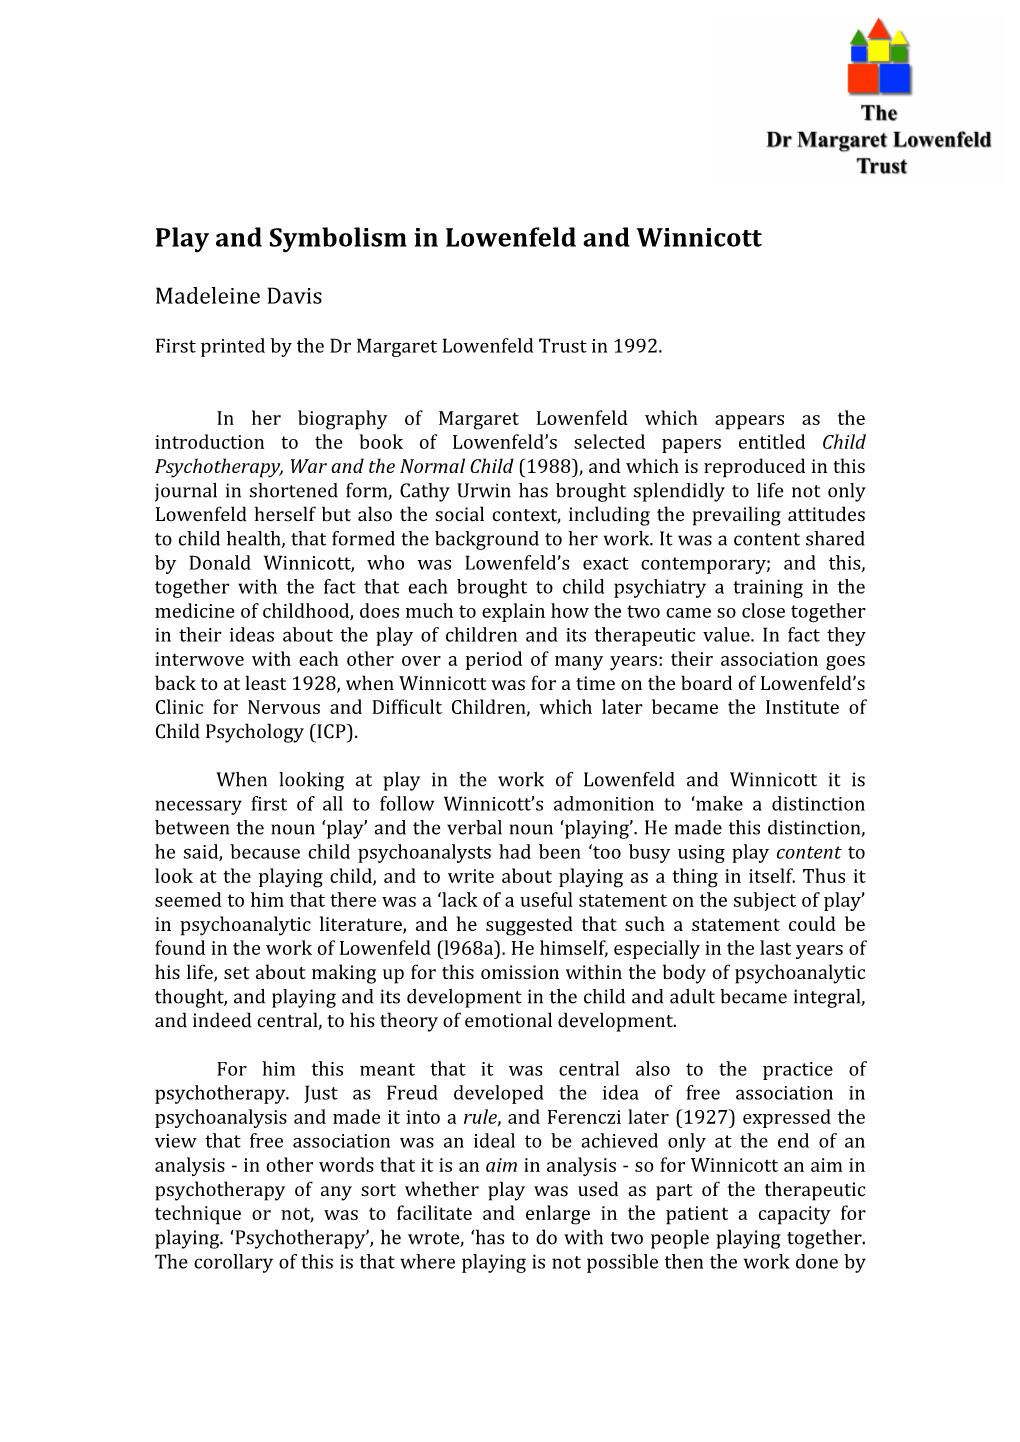 Play and Symbolism in Lowenfeld and Winnicott